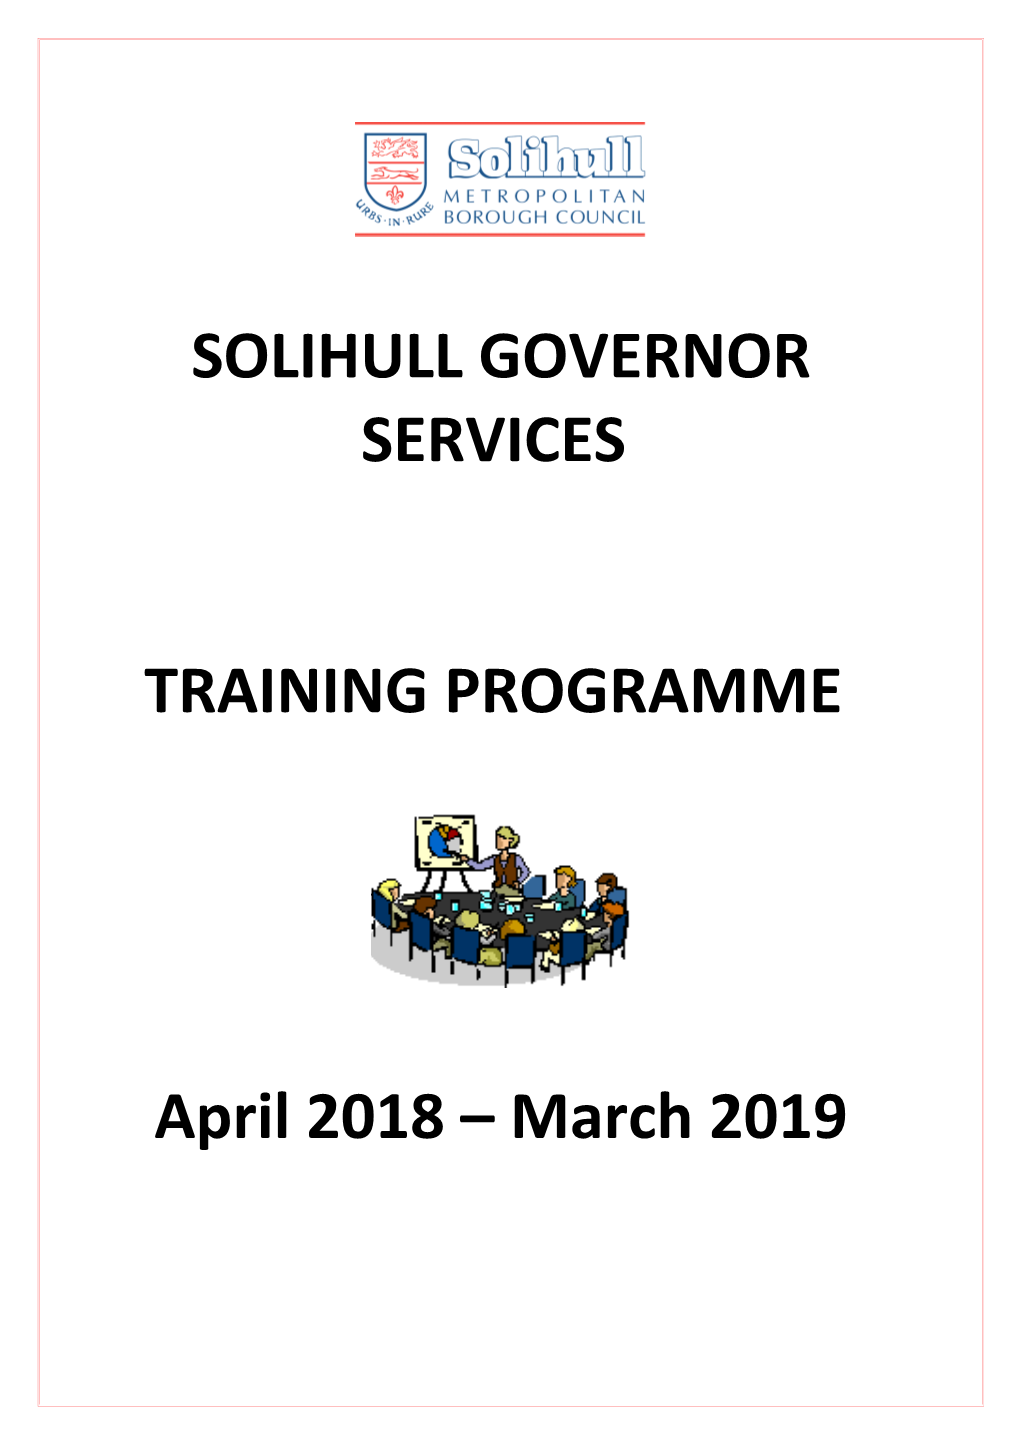 Solihull Governor Services